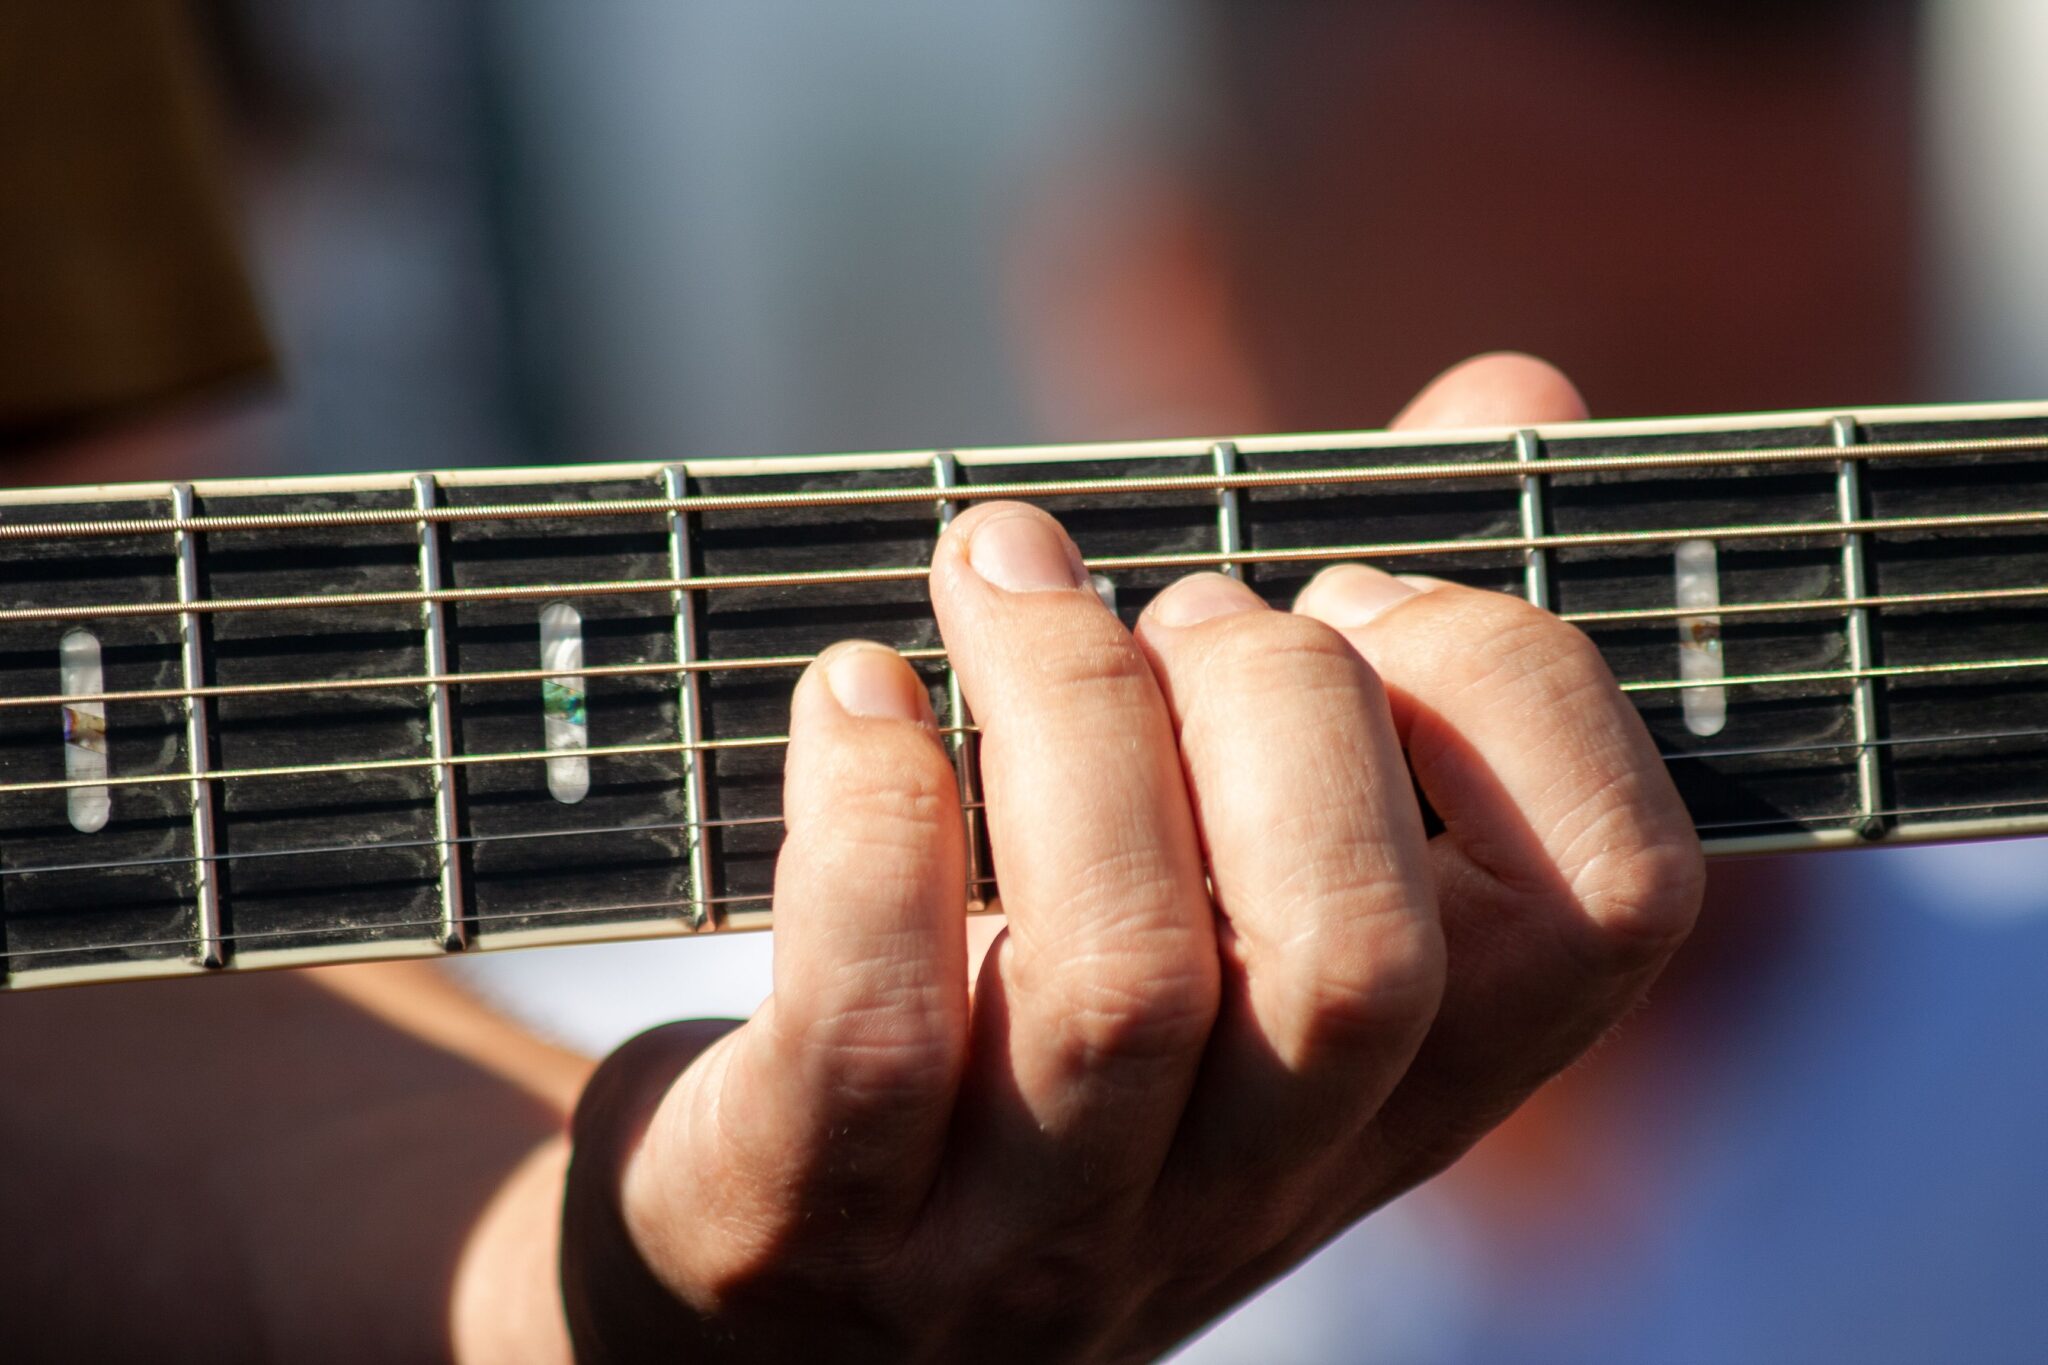 Fretboard and playing guitar